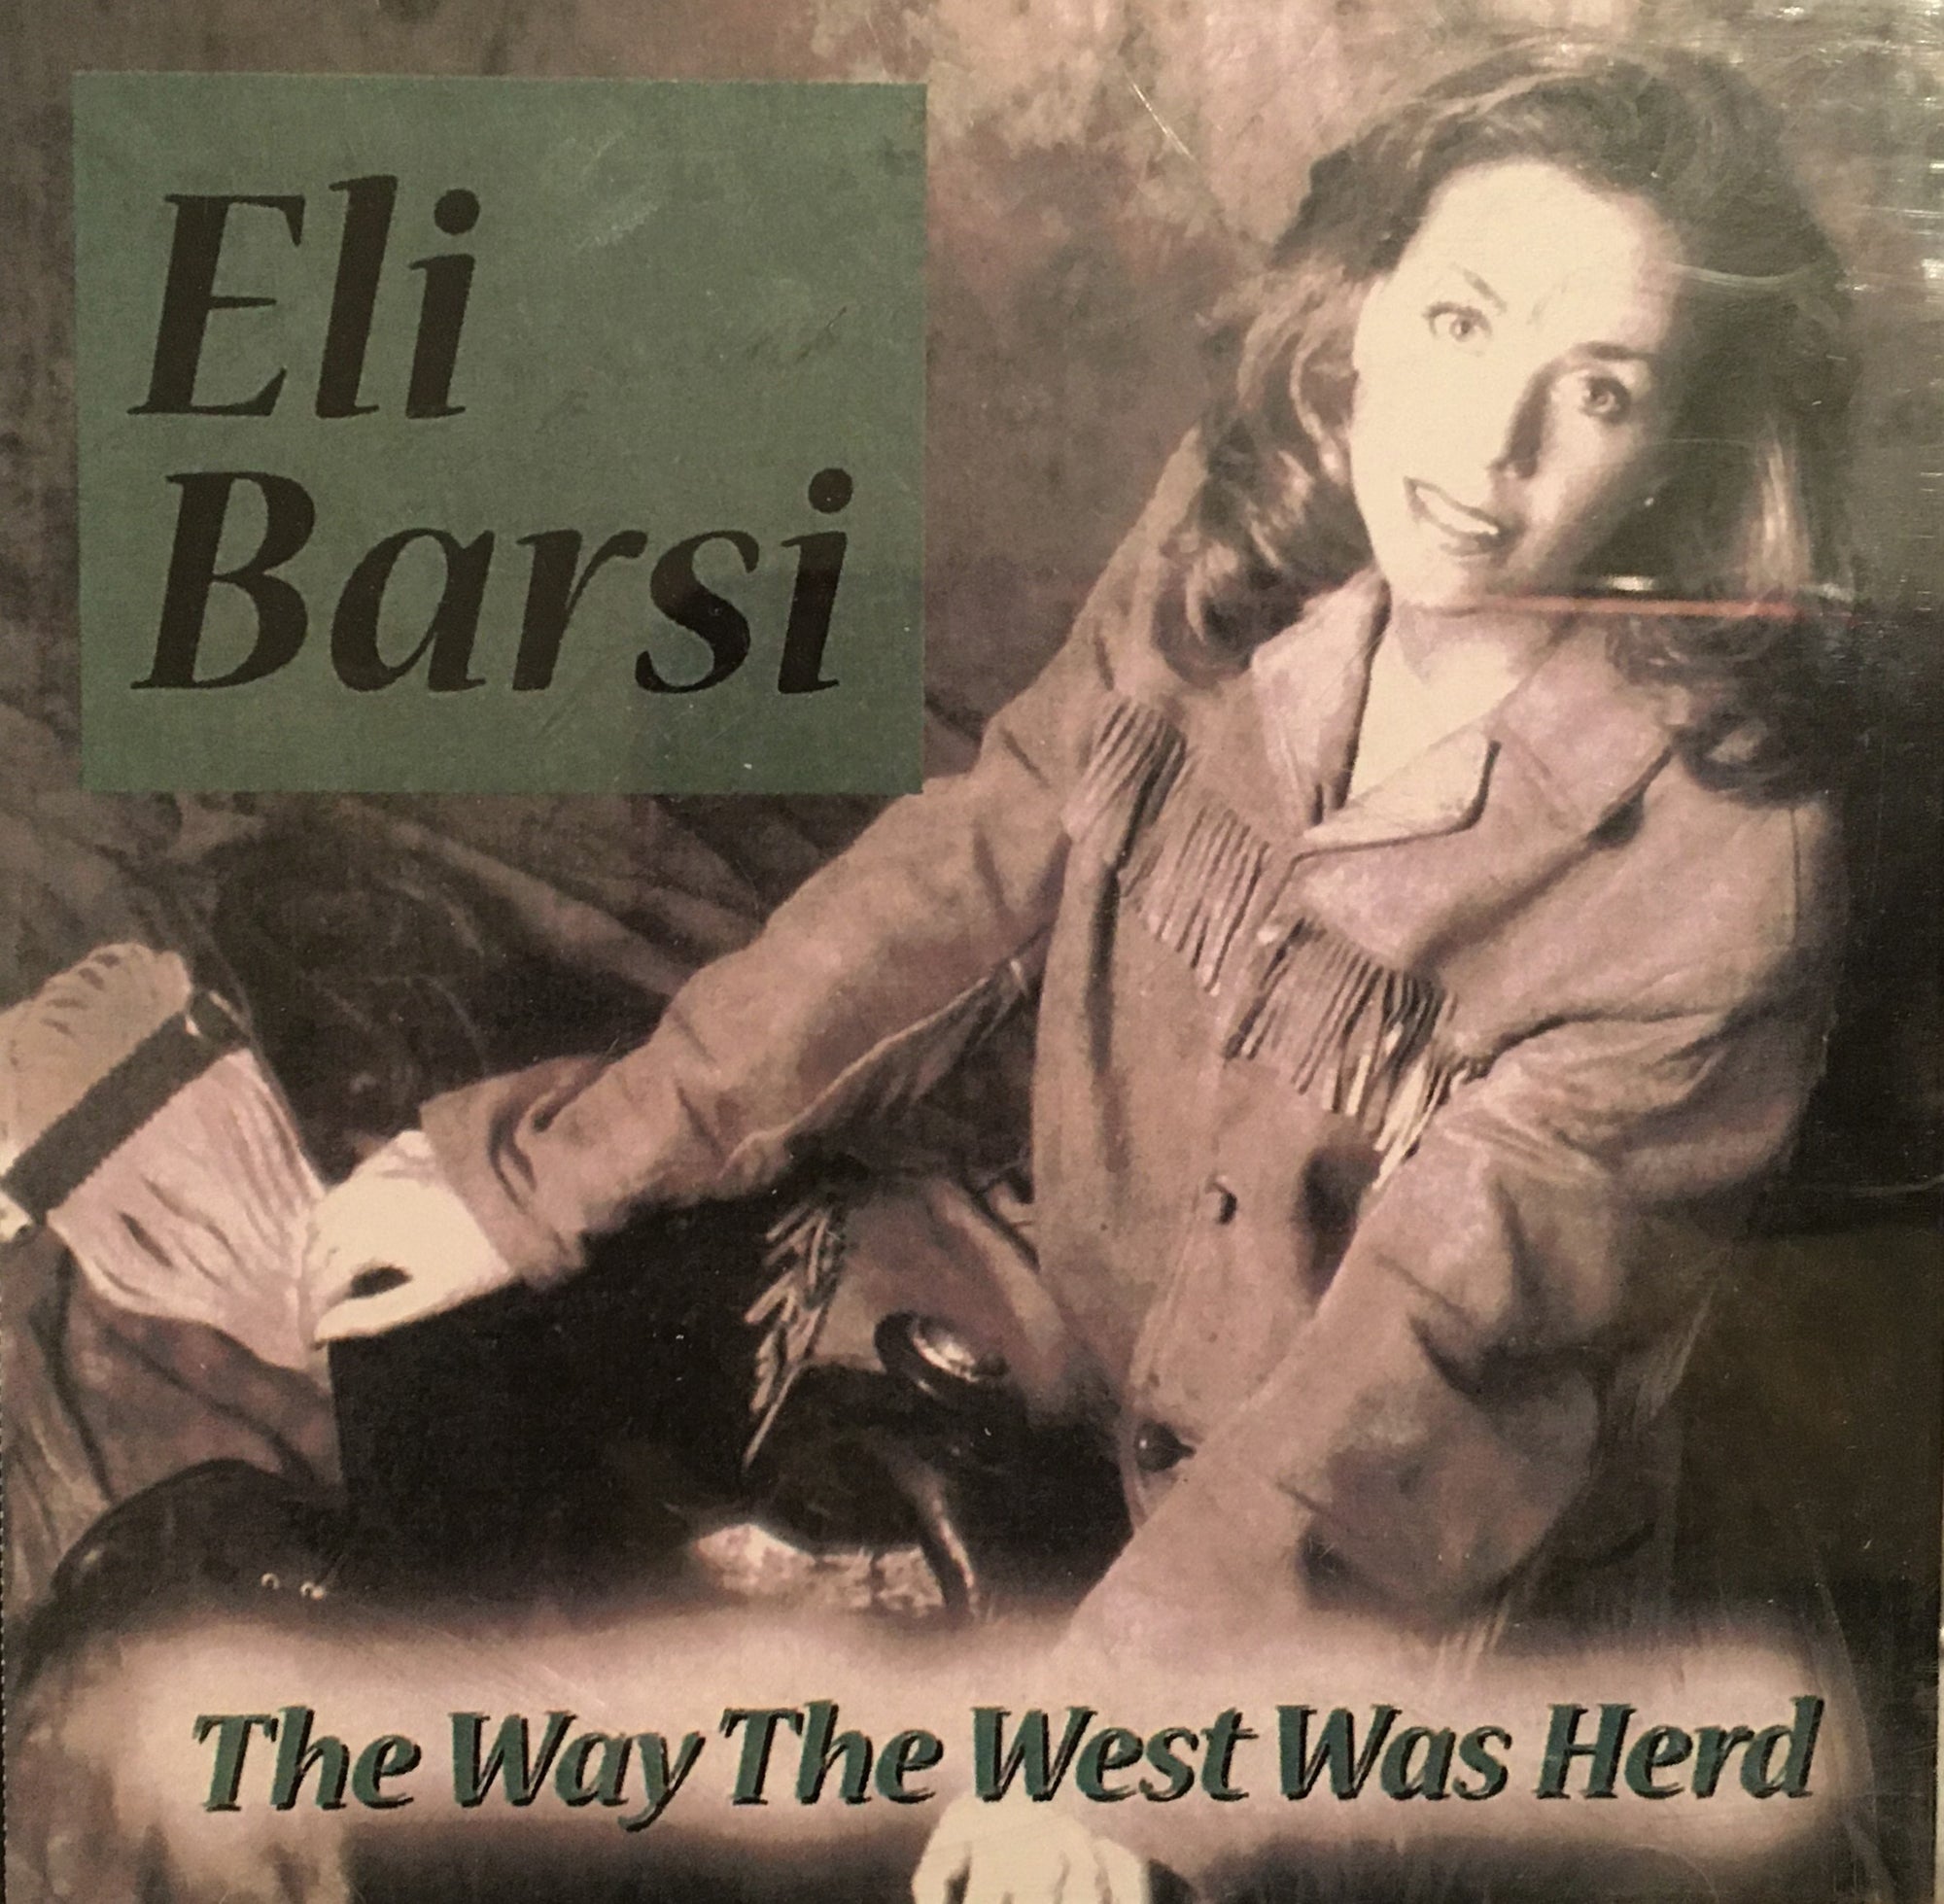 CD The Way The West Was Herd by Eli Barsi